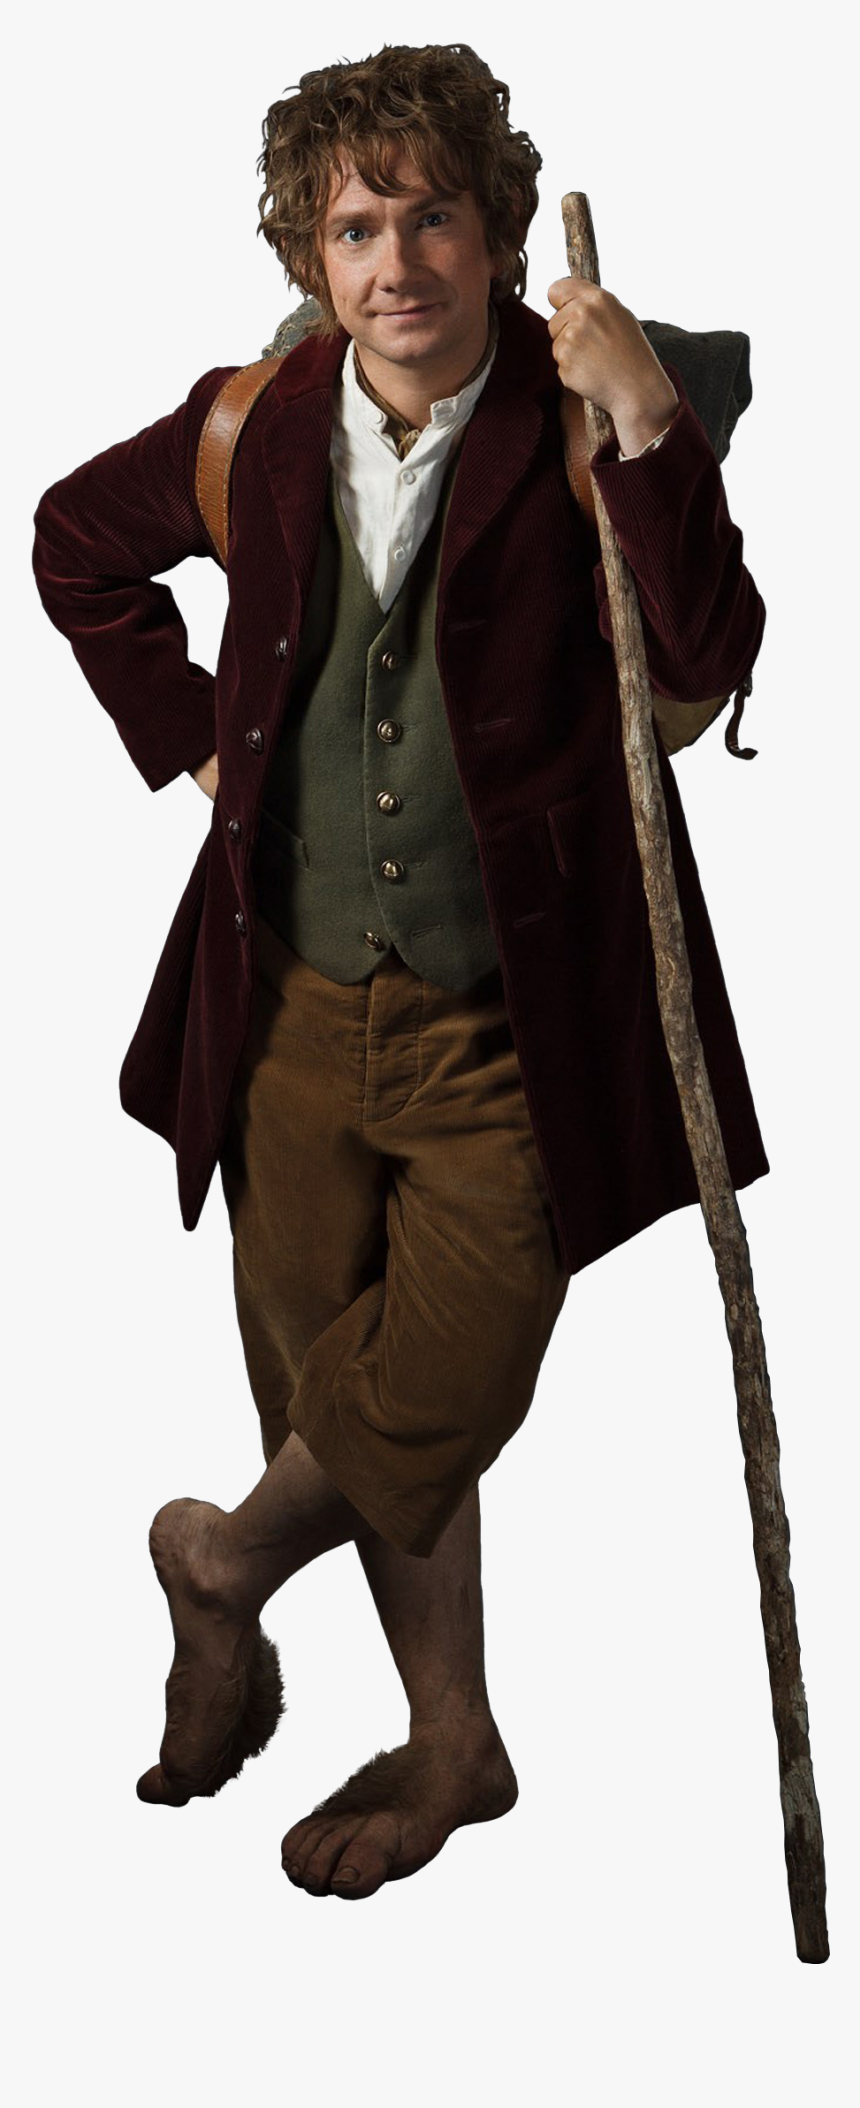 Bilbo Baggins The Hobbit - Bilbo Baggins - The Hobbit Movie Cardboard Stand Up, HD Png Download, Free Download